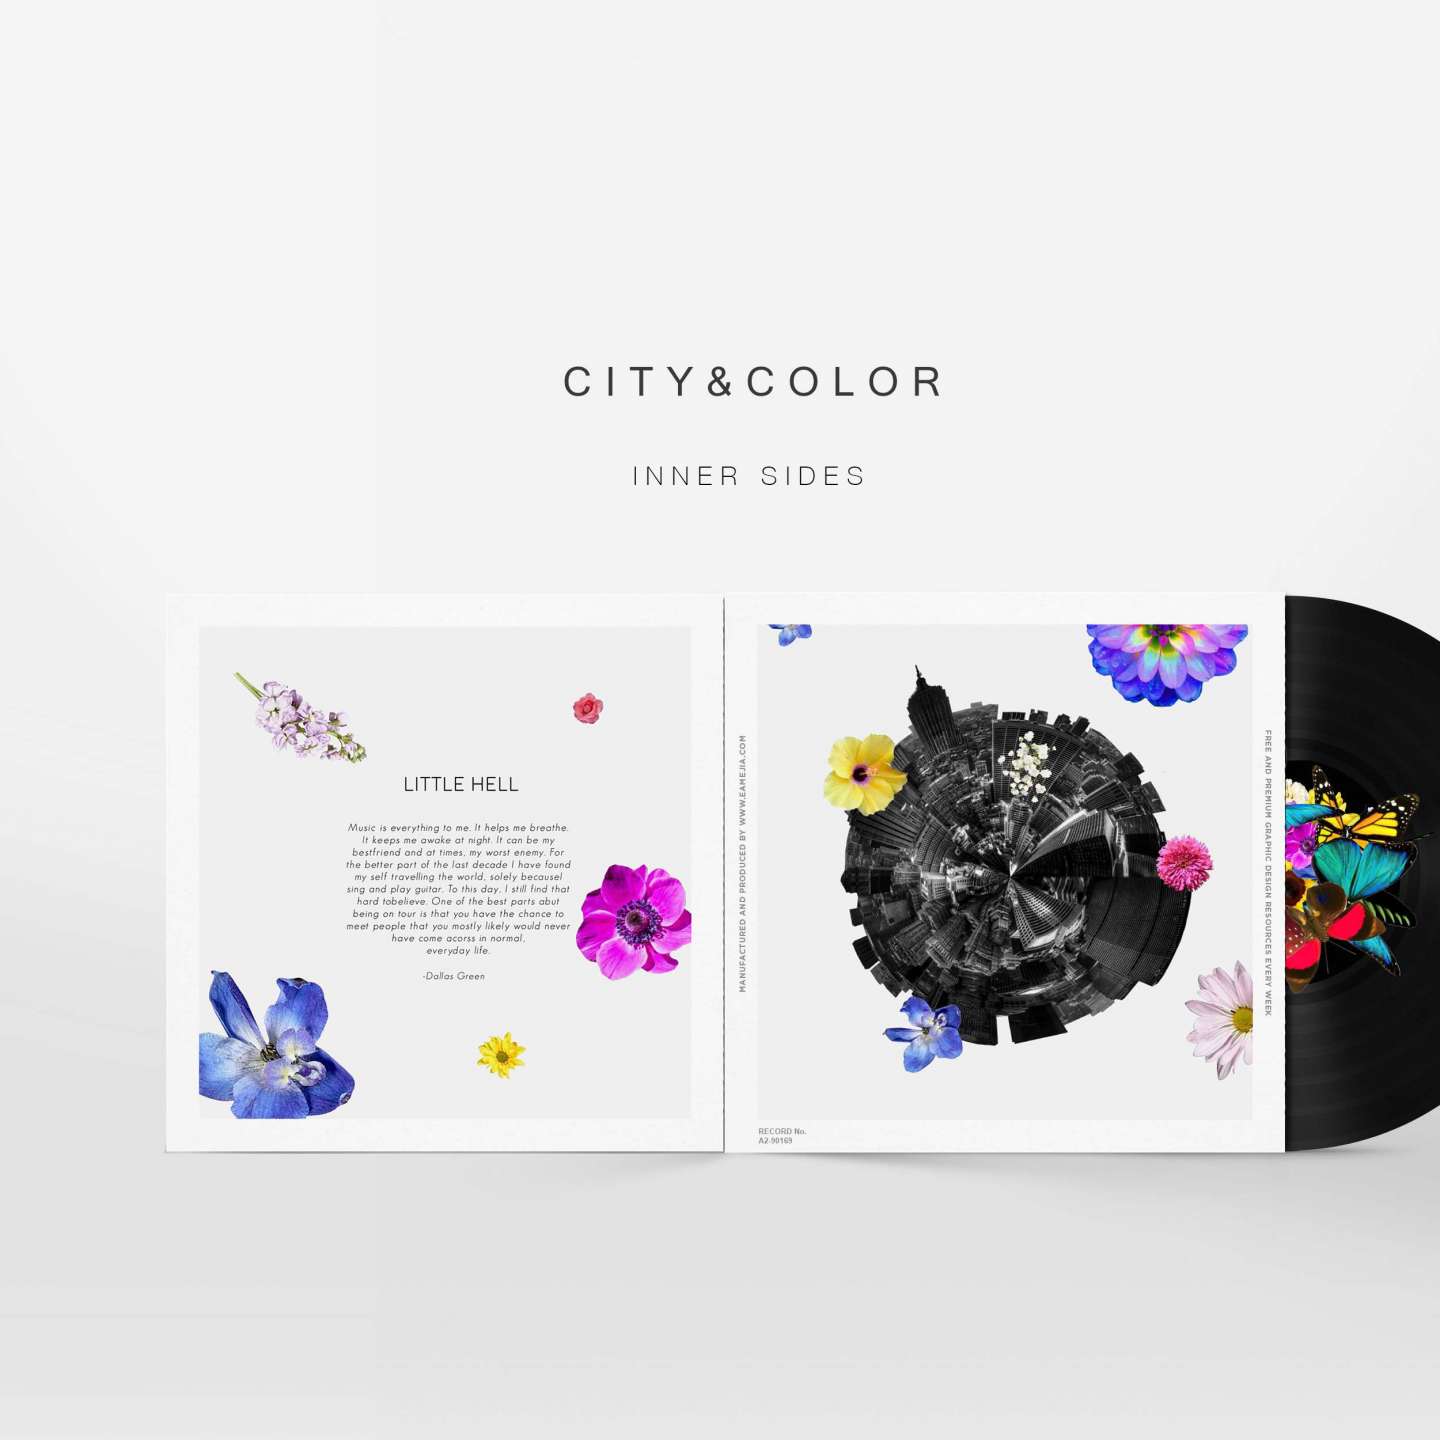 Album Cover Design - Little hell by City & Color